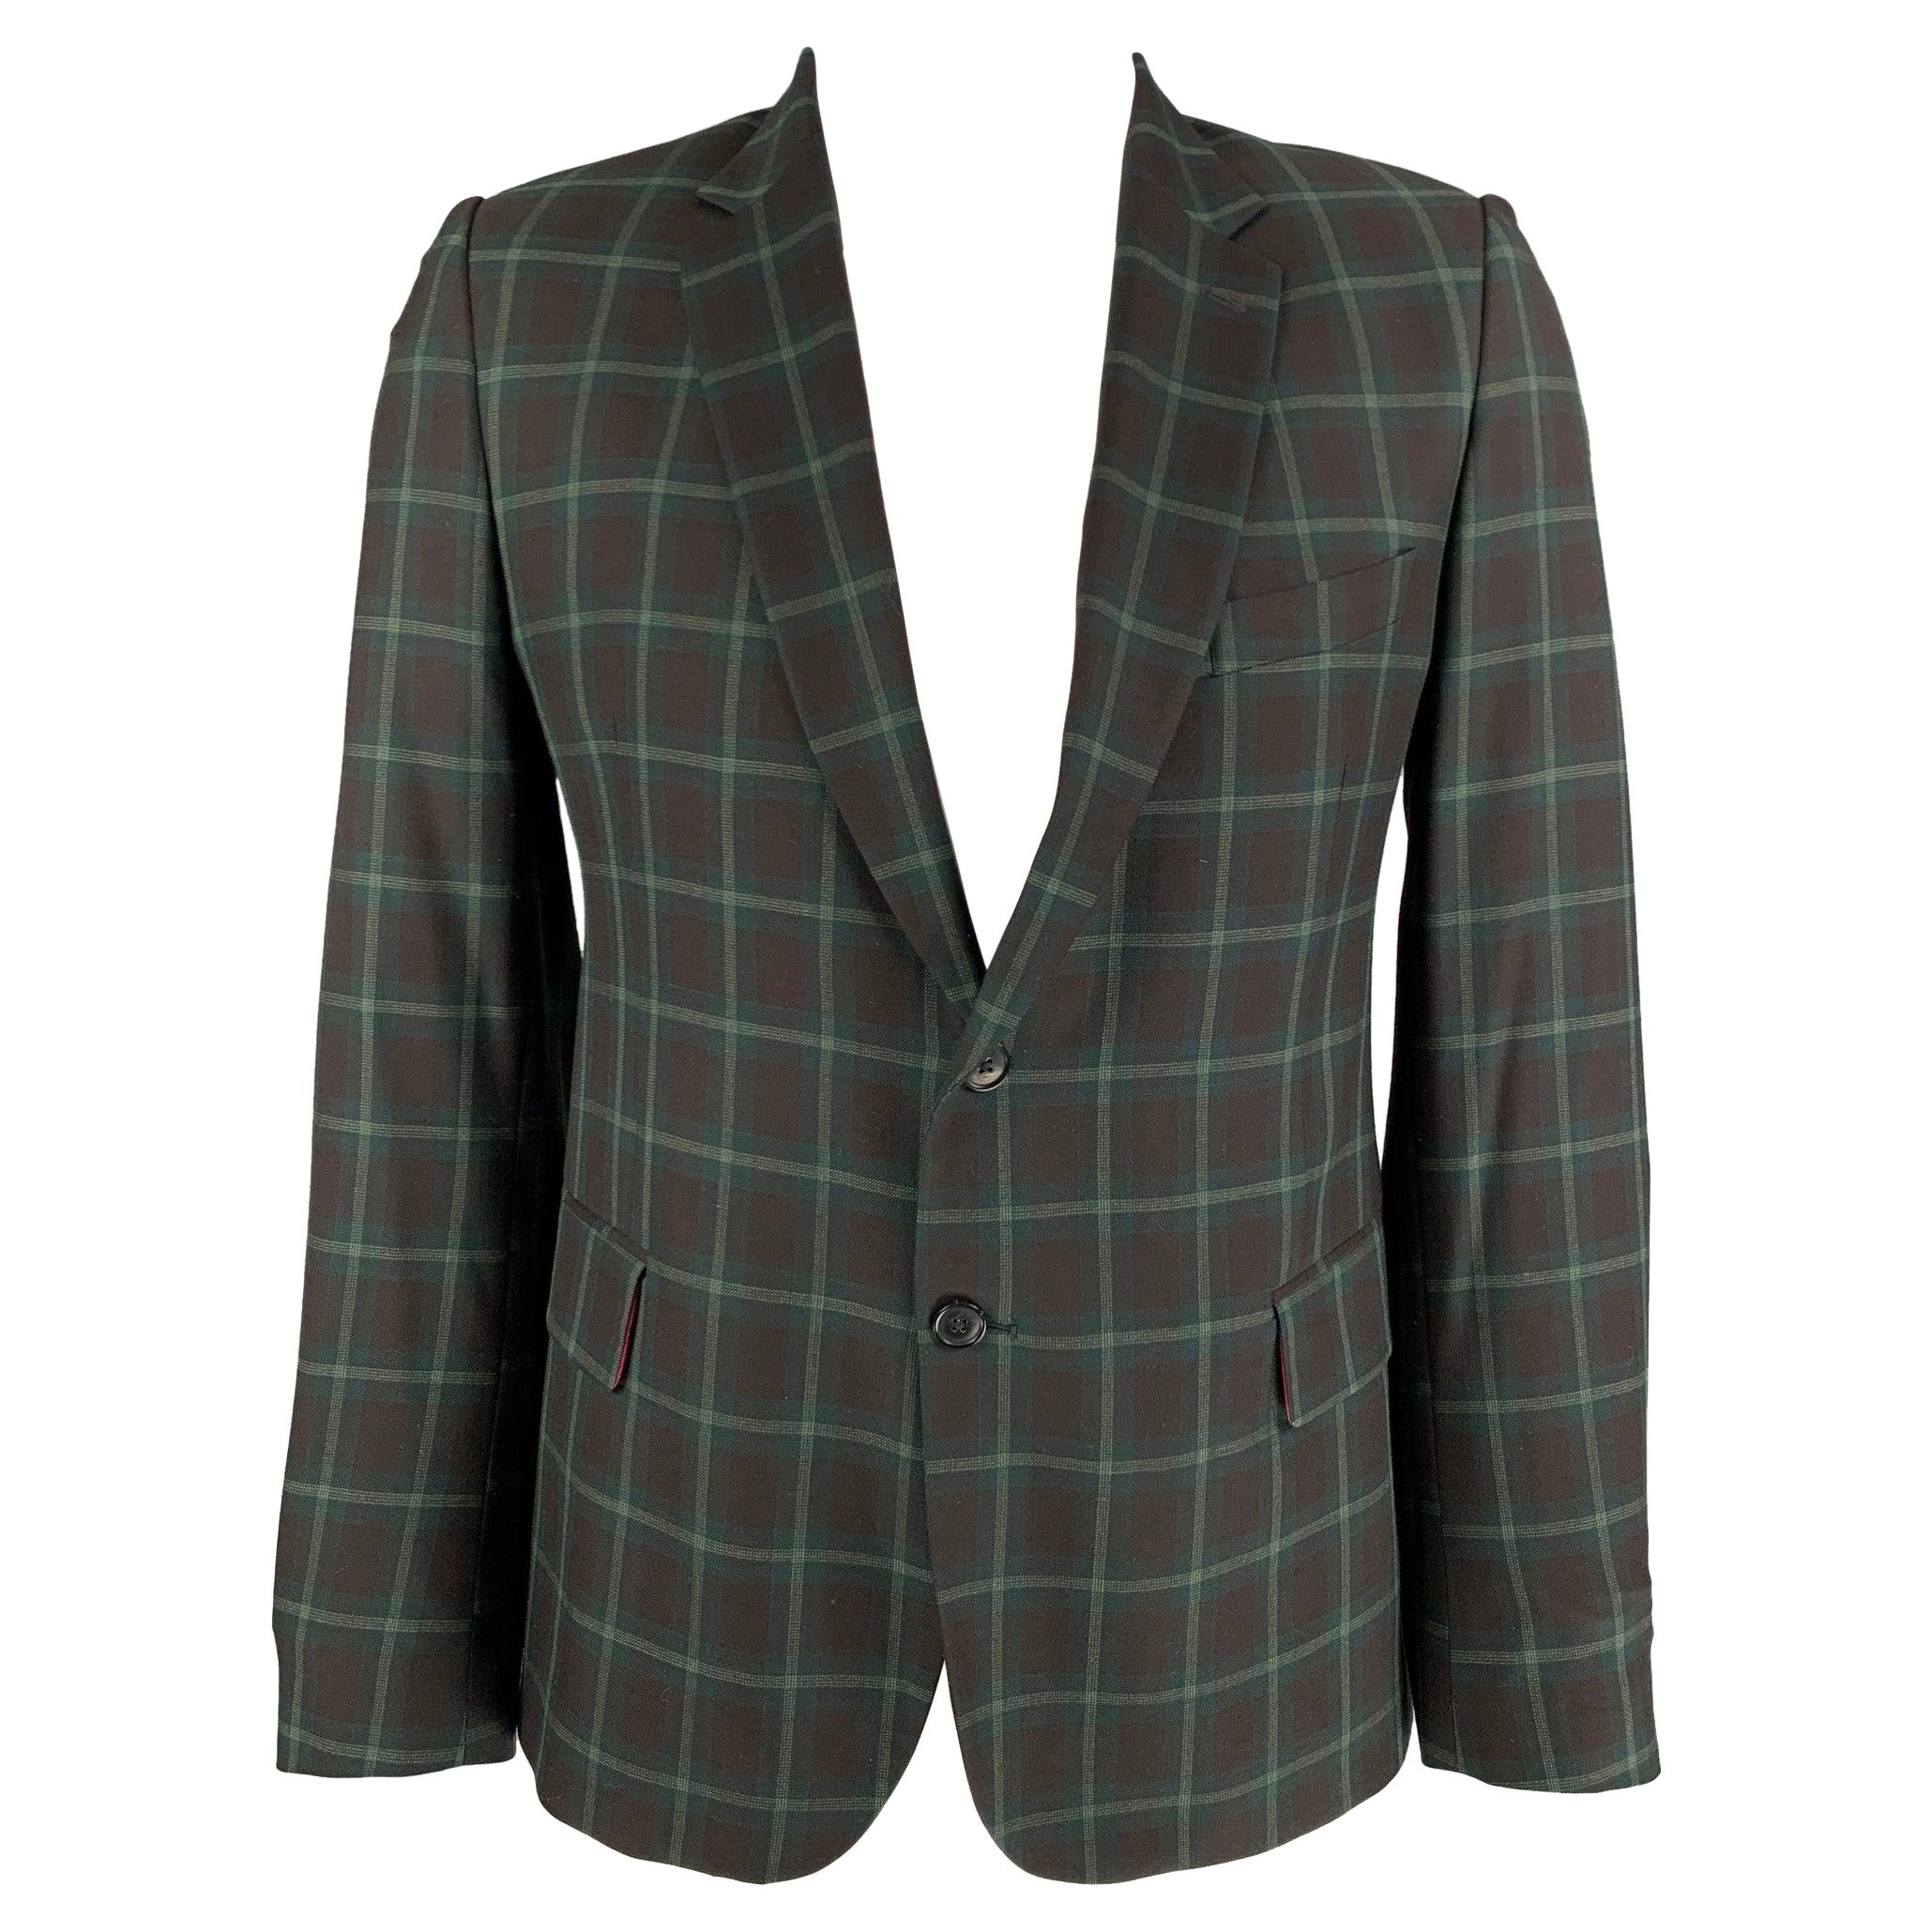 PAUL SMITH Soho Fit Size 46 Brown & Green Plaid Wool Notch Lapel Sport Coat For Sale